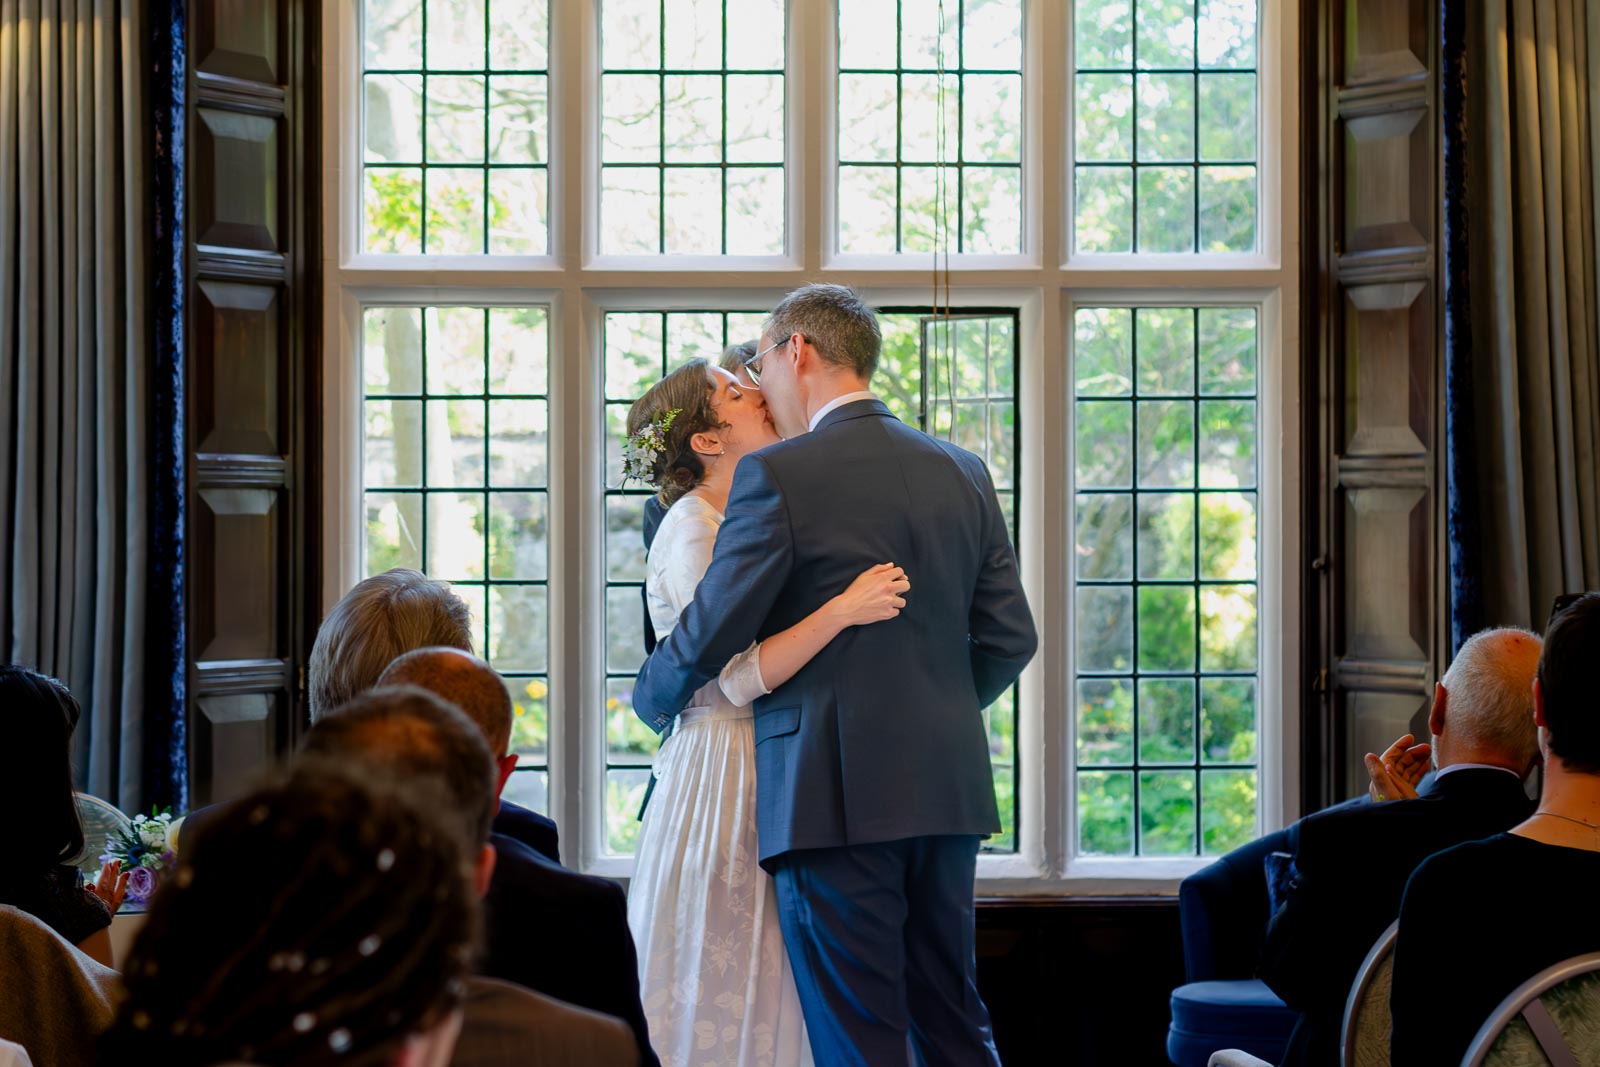 Alexis kisses Niell after their wedding in the Ainsworth Room at Lewes Registry Office.